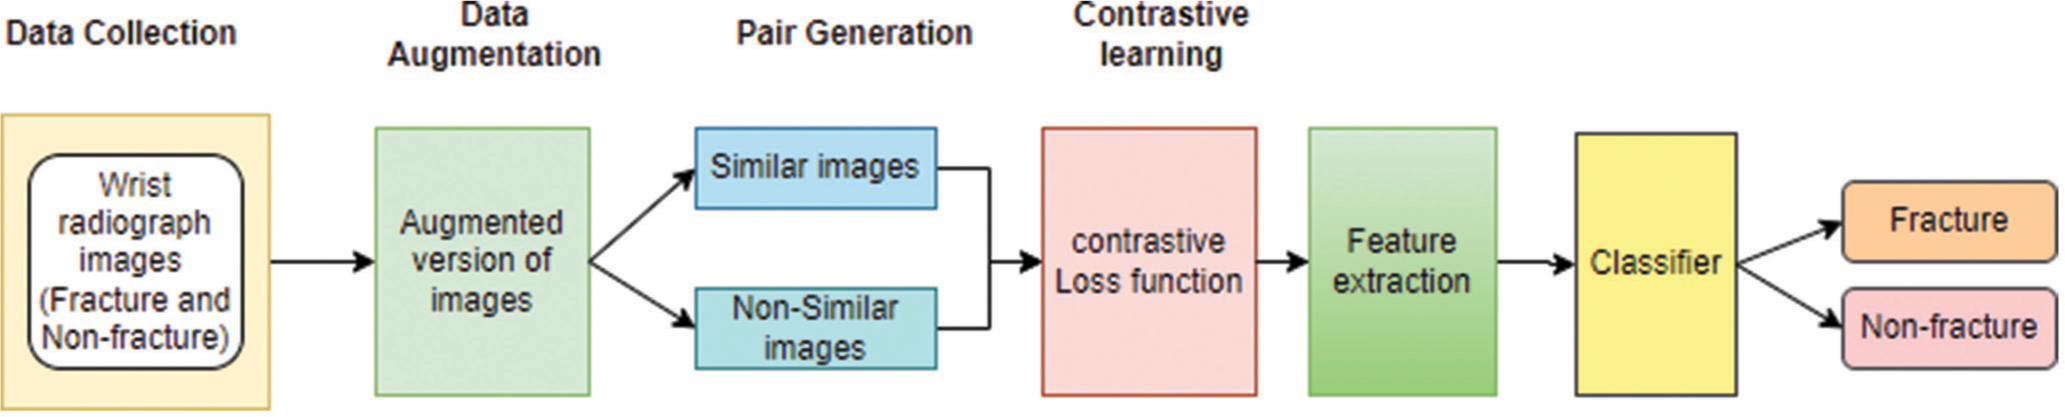 Architecture of self-supervised learning – Data collection, data augmentation, and pair generation followed by contrastive learning for feature extraction to classify fracture and not-fracture images.